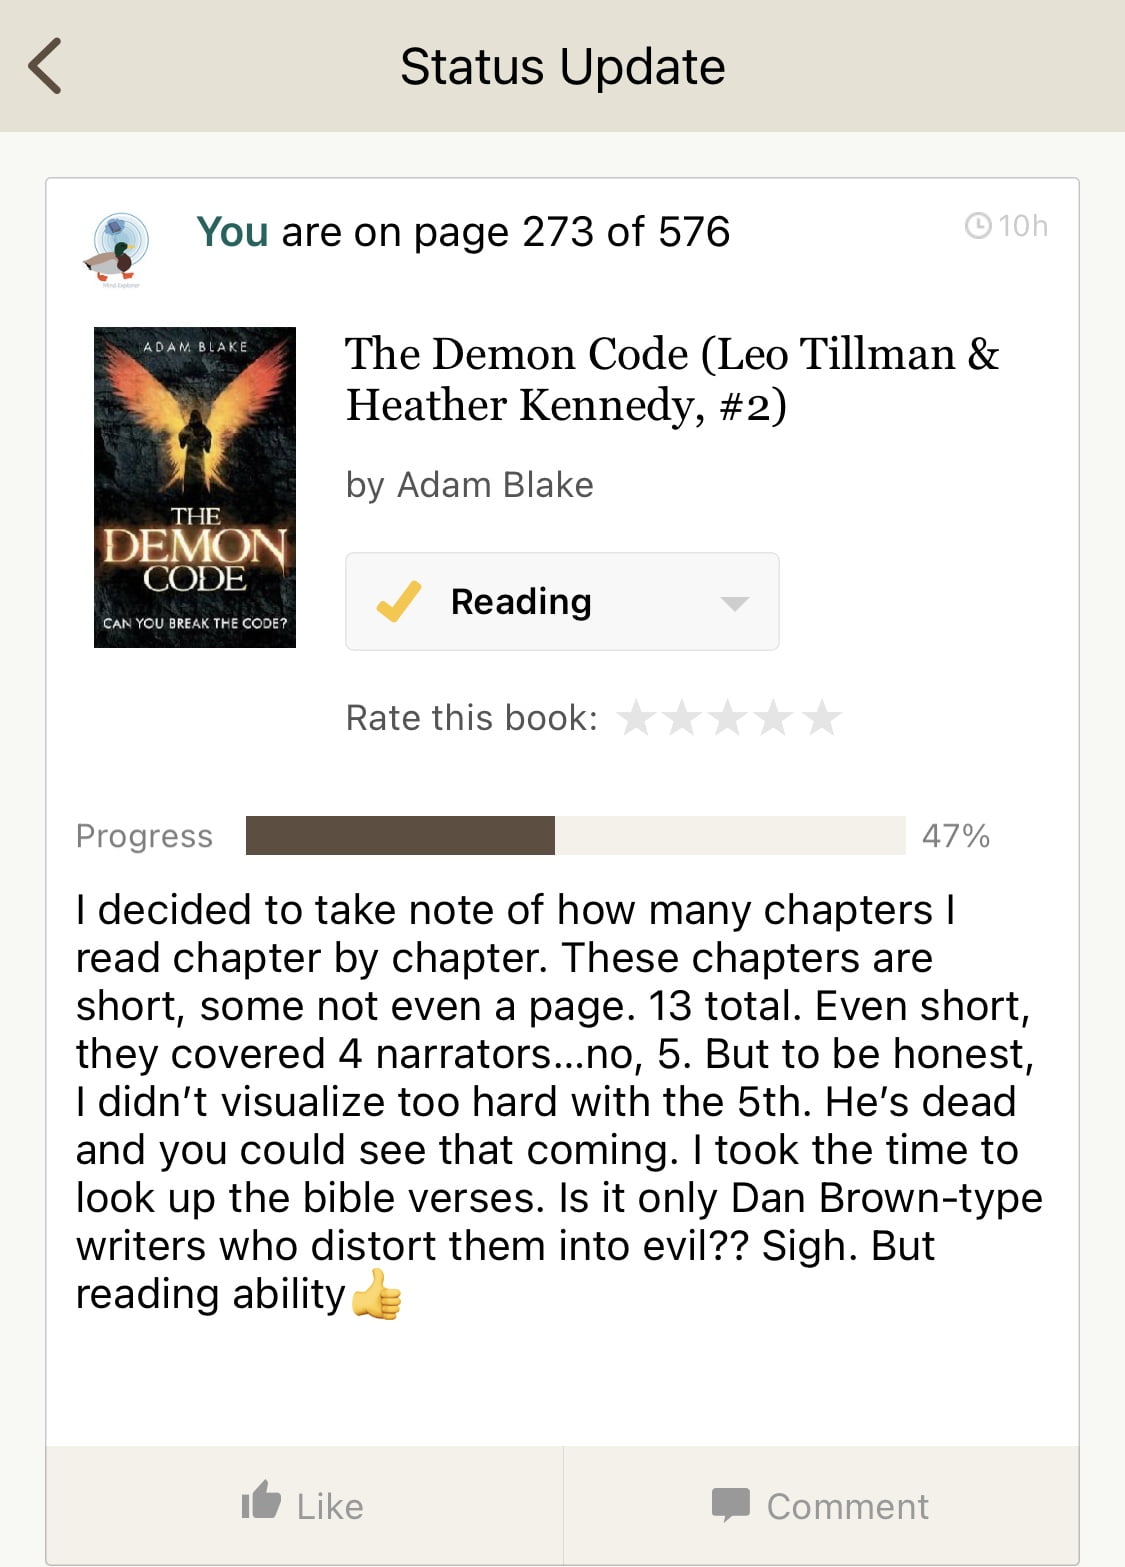 ＜
Status Update
You are on page 273 of 576
11:04AM
The Demon Code (Leo Tillman &
Heather Kennedy, #2) by Adam Blake
THE
DEMON
CODE
CAN YOU BREAK THE CODE?
Reading
Rate this book:
Progress
47%
I decided to take note of how many chapters I read chapter by chapter. These chapters are short, some not even a page. 13 total. Even short, they covered 4 narrators...no, 5. But to be honest, I didn't visualize too hard with the 5th. He's dead and you could see that coming. I took the time to look up the bible verses. Is it only Dan Brown-type writers who distort them into evil?? Sigh. But reading ability (nice one!)